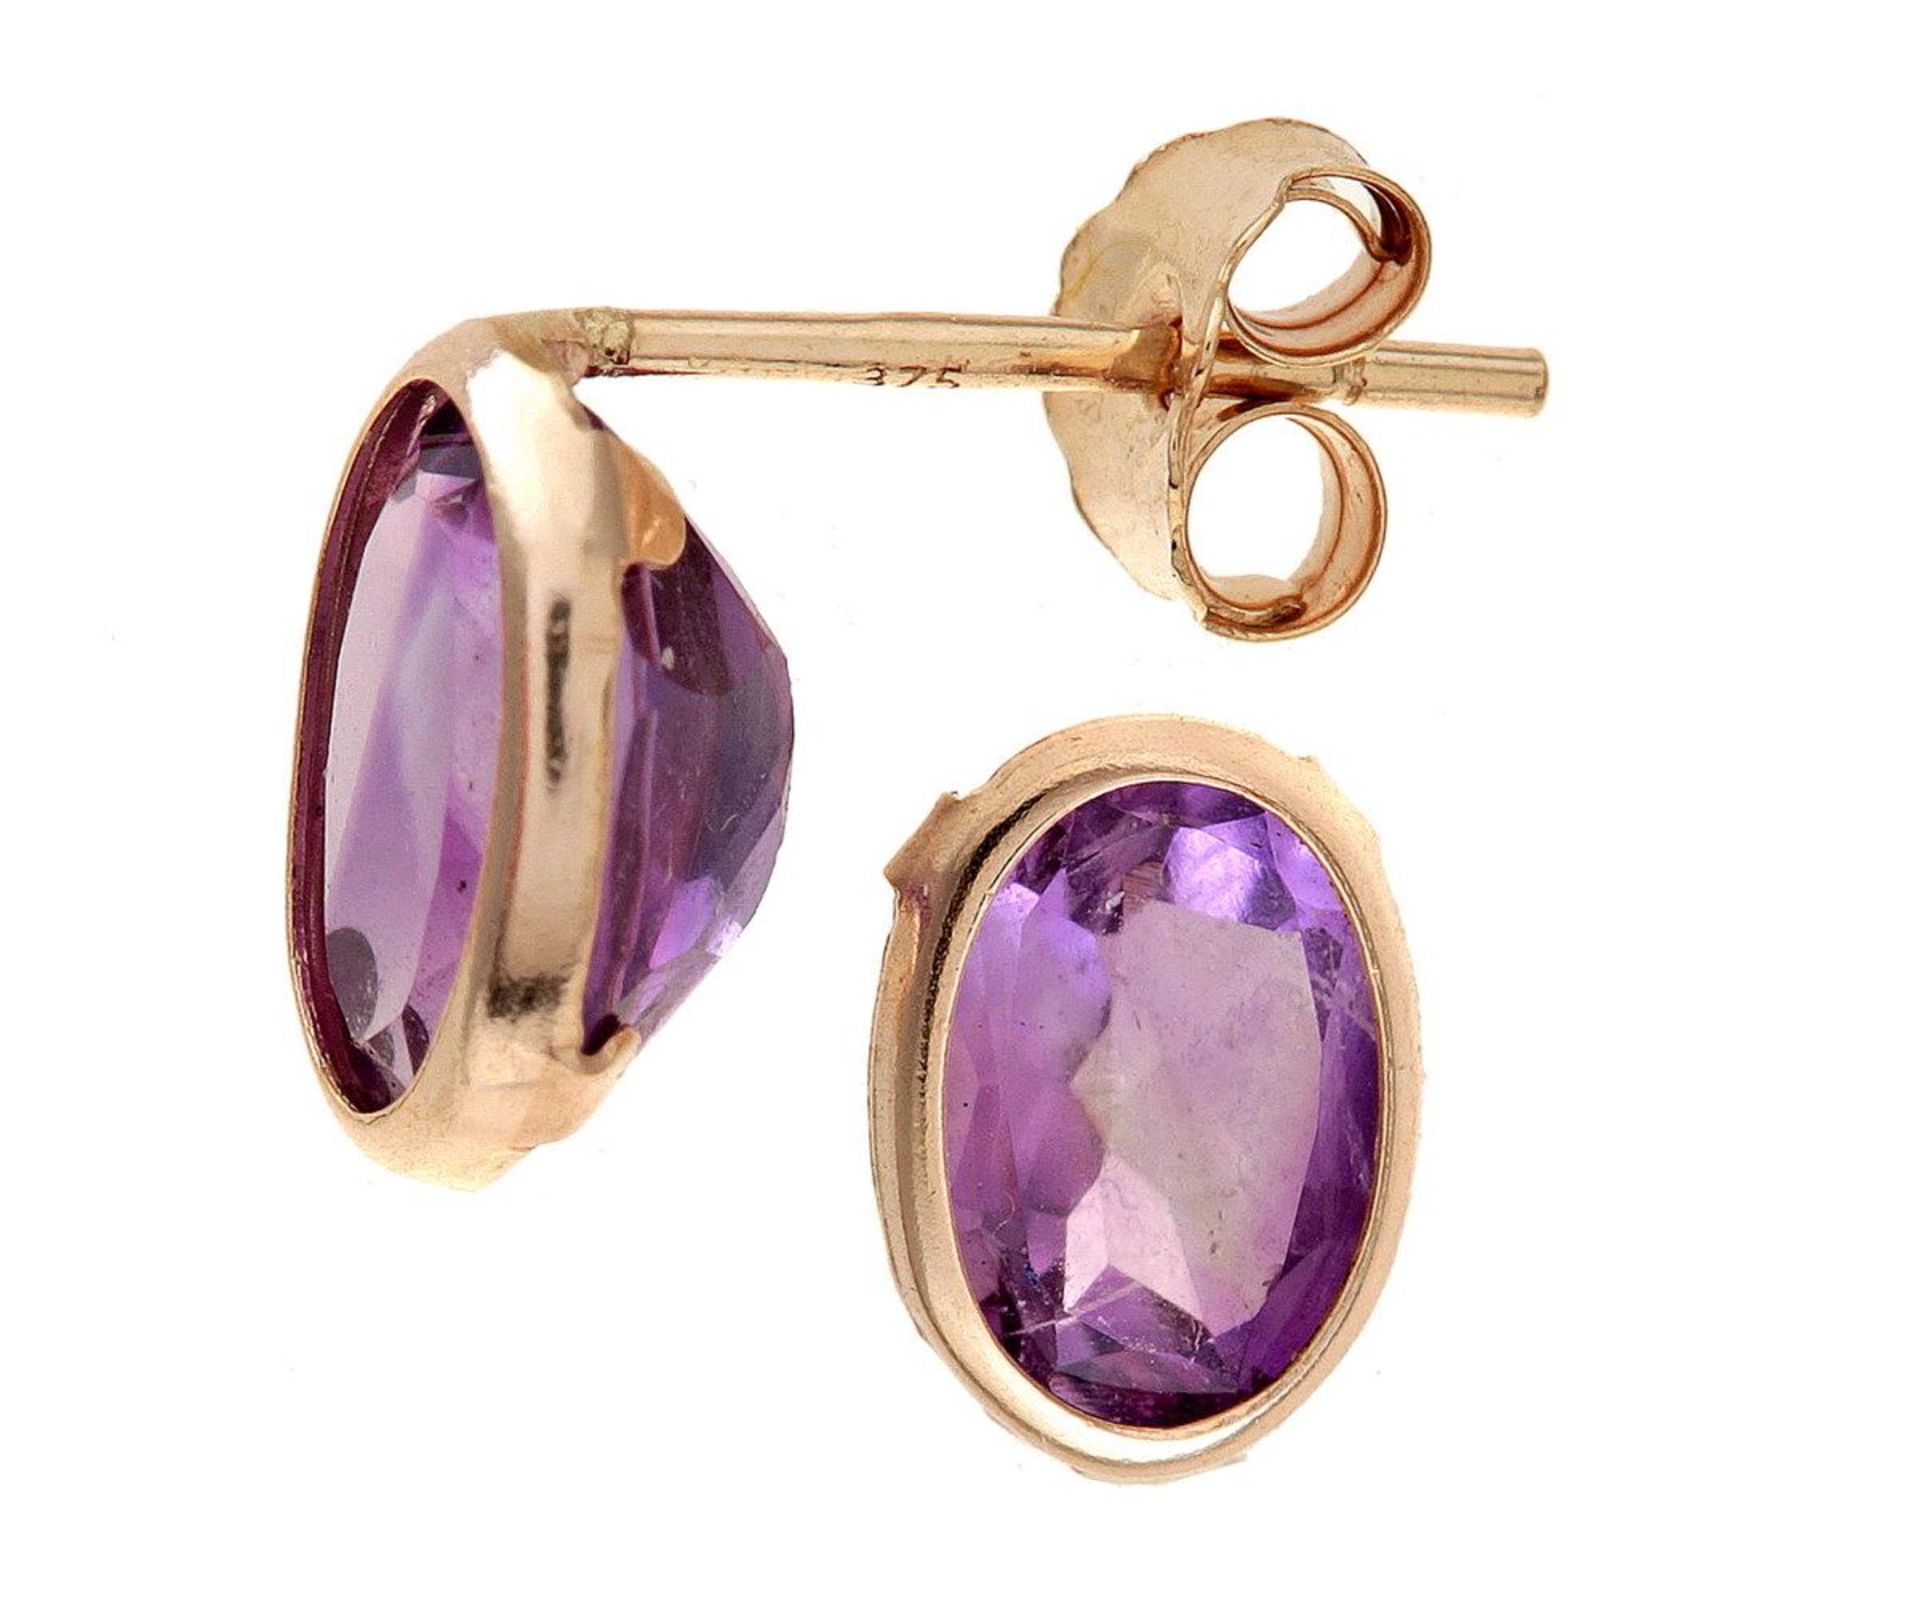 Oval Amethyst Natural Gemstone Stud Earrings, Metal 9ct Yellow Gold, Weight (g) 0.61, RRP £74.99 (